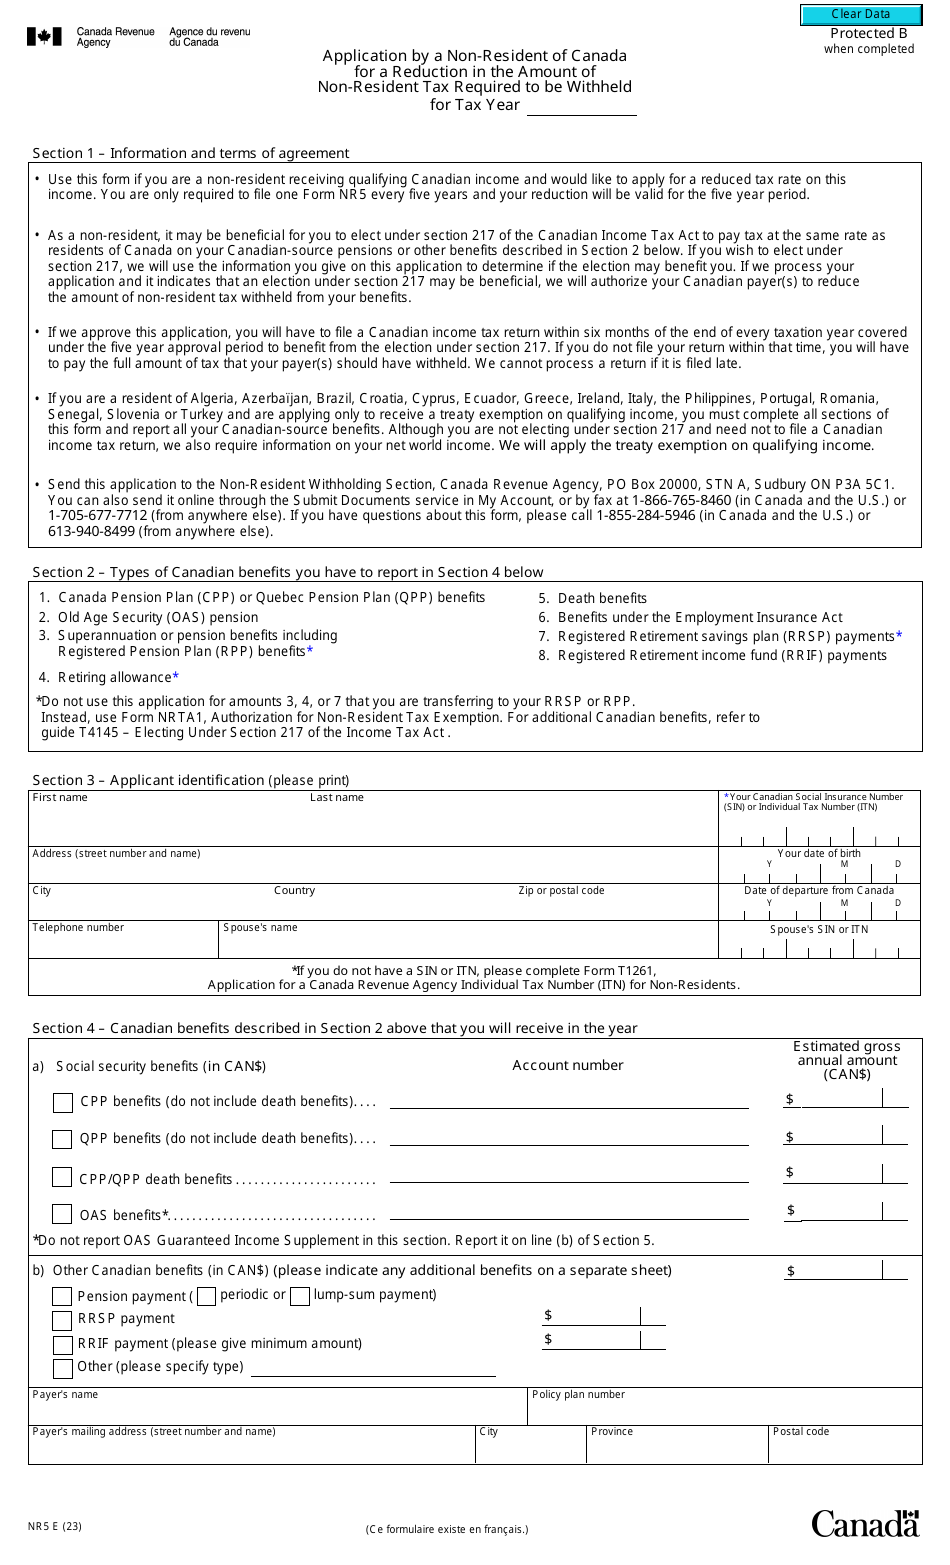 Form NR5 Application by a Non-resident of Canada for a Reduction in the Amount of Non-resident Tax Required to Be Withheld - Canada, Page 1